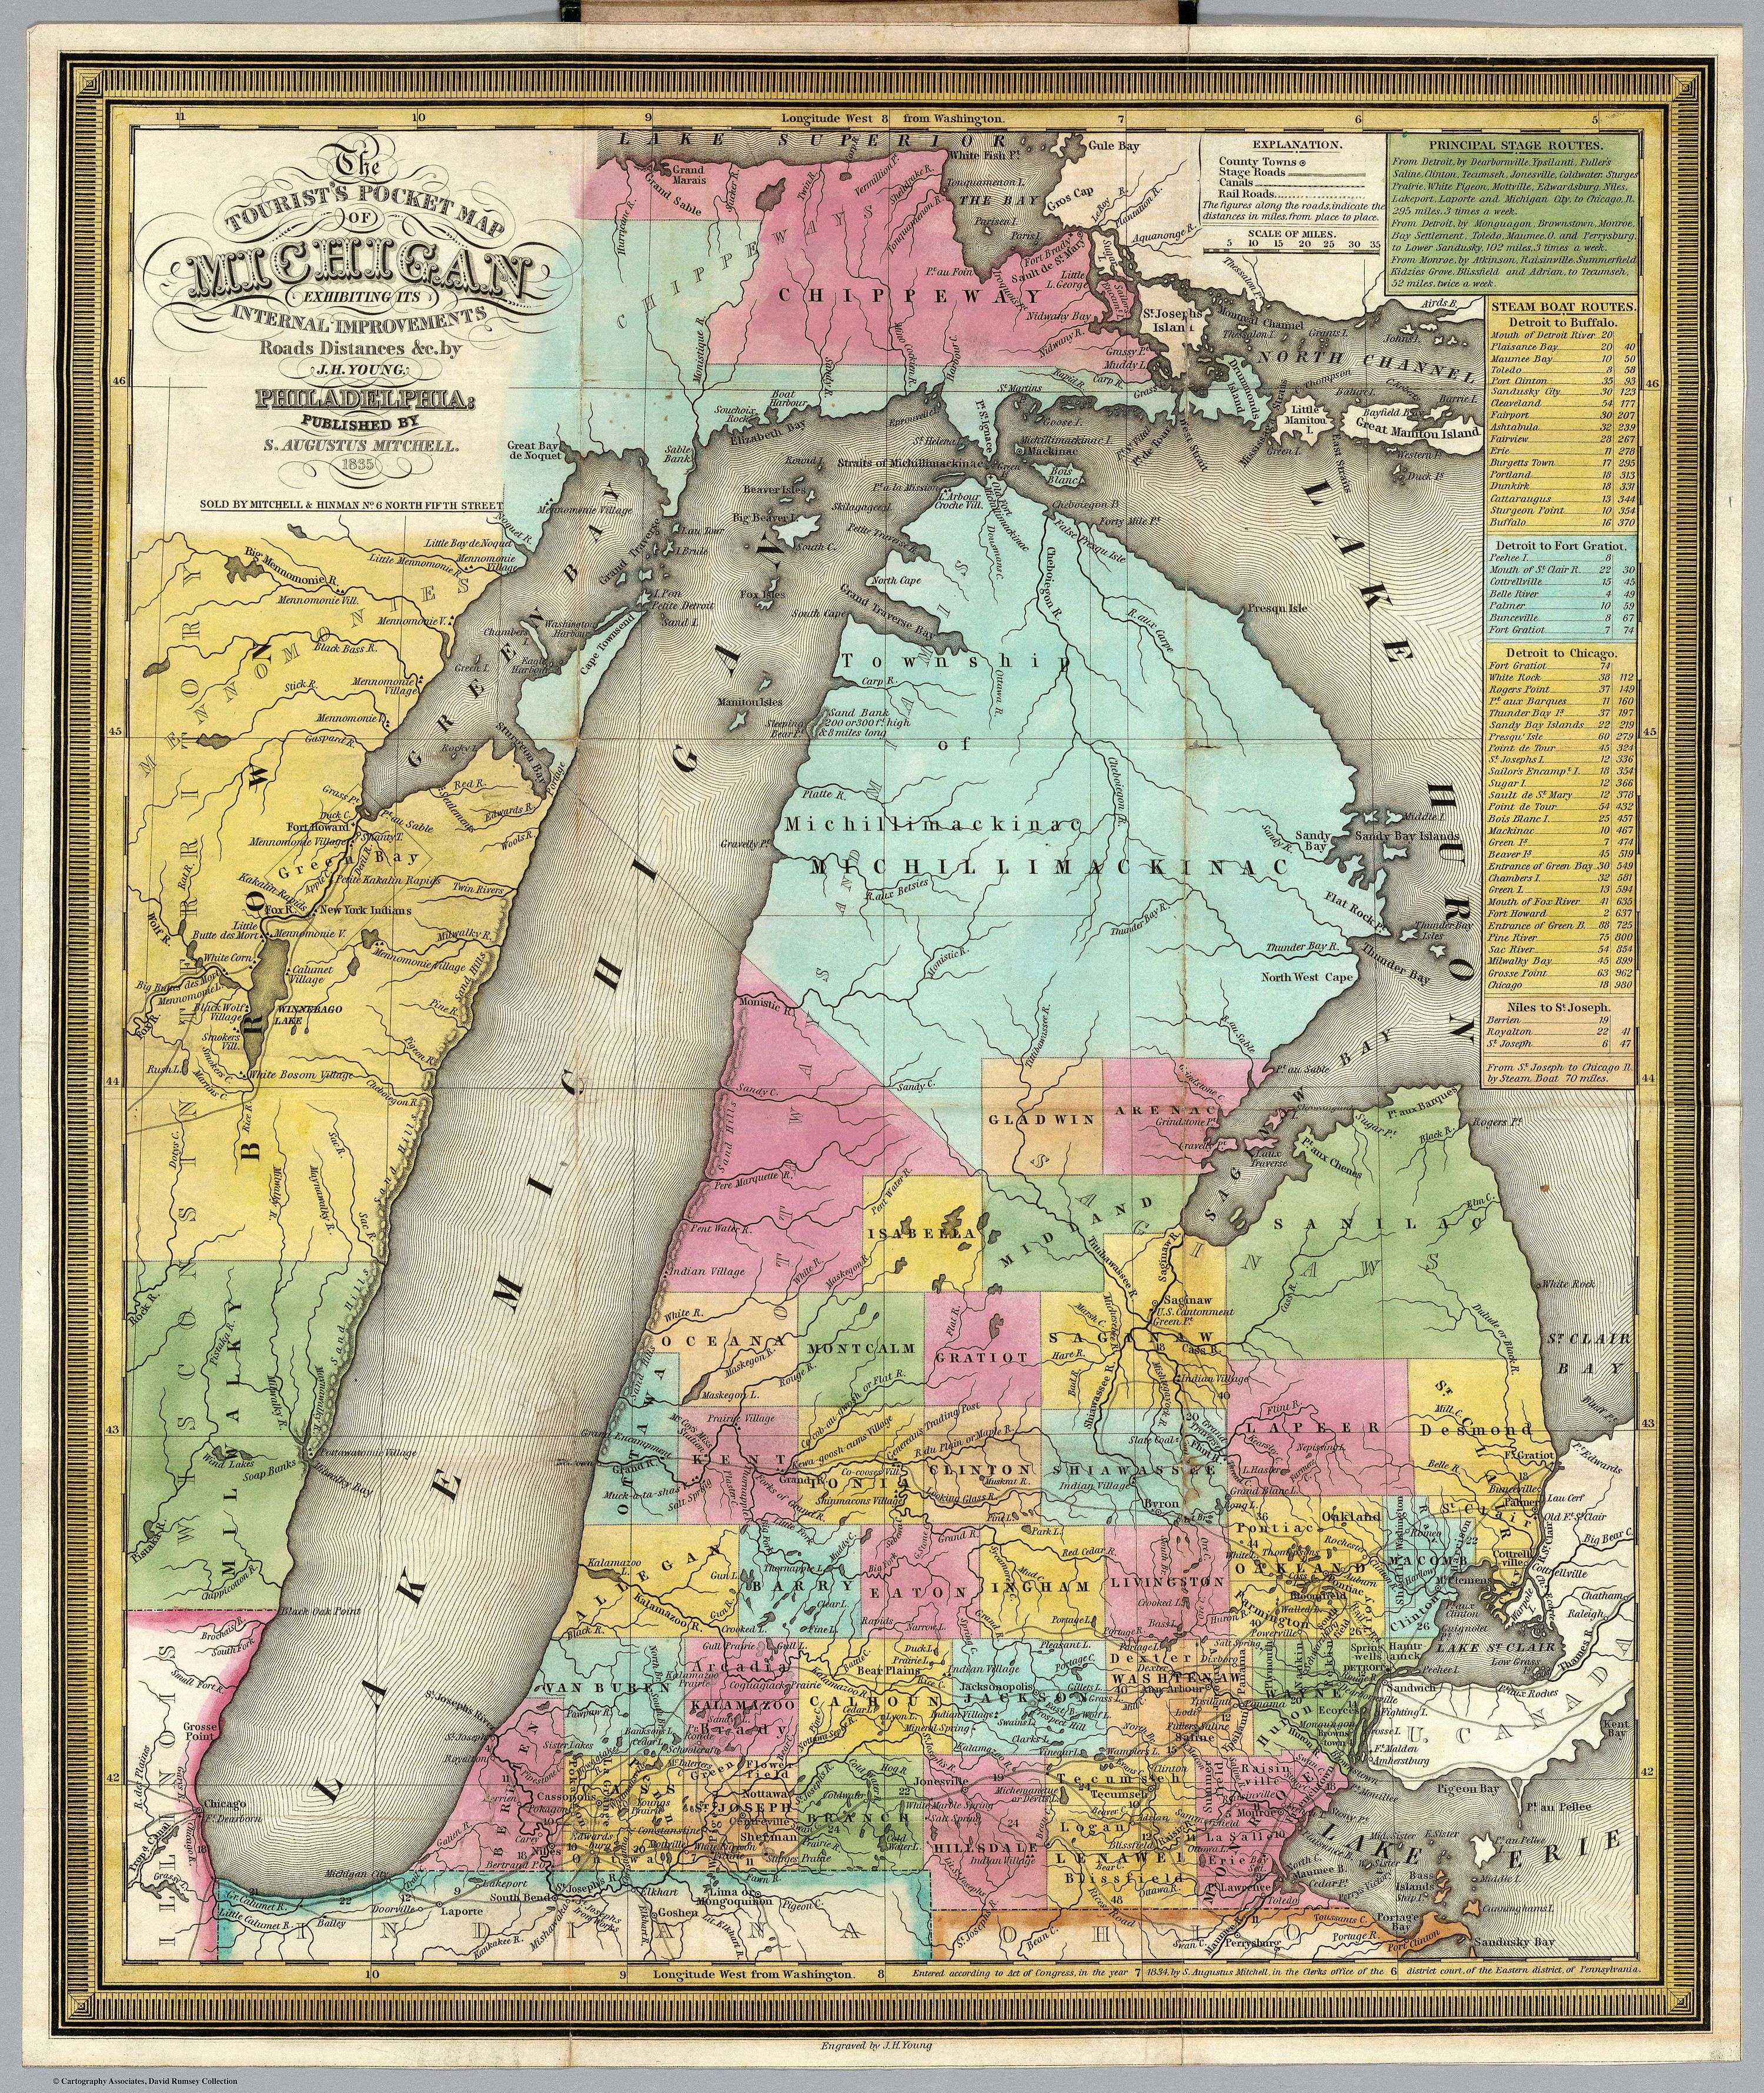 Fort Howard on the 1835 Tourist's Pocket Map of Michigan among the "Mennomonie" villages of Wisconsin Territory